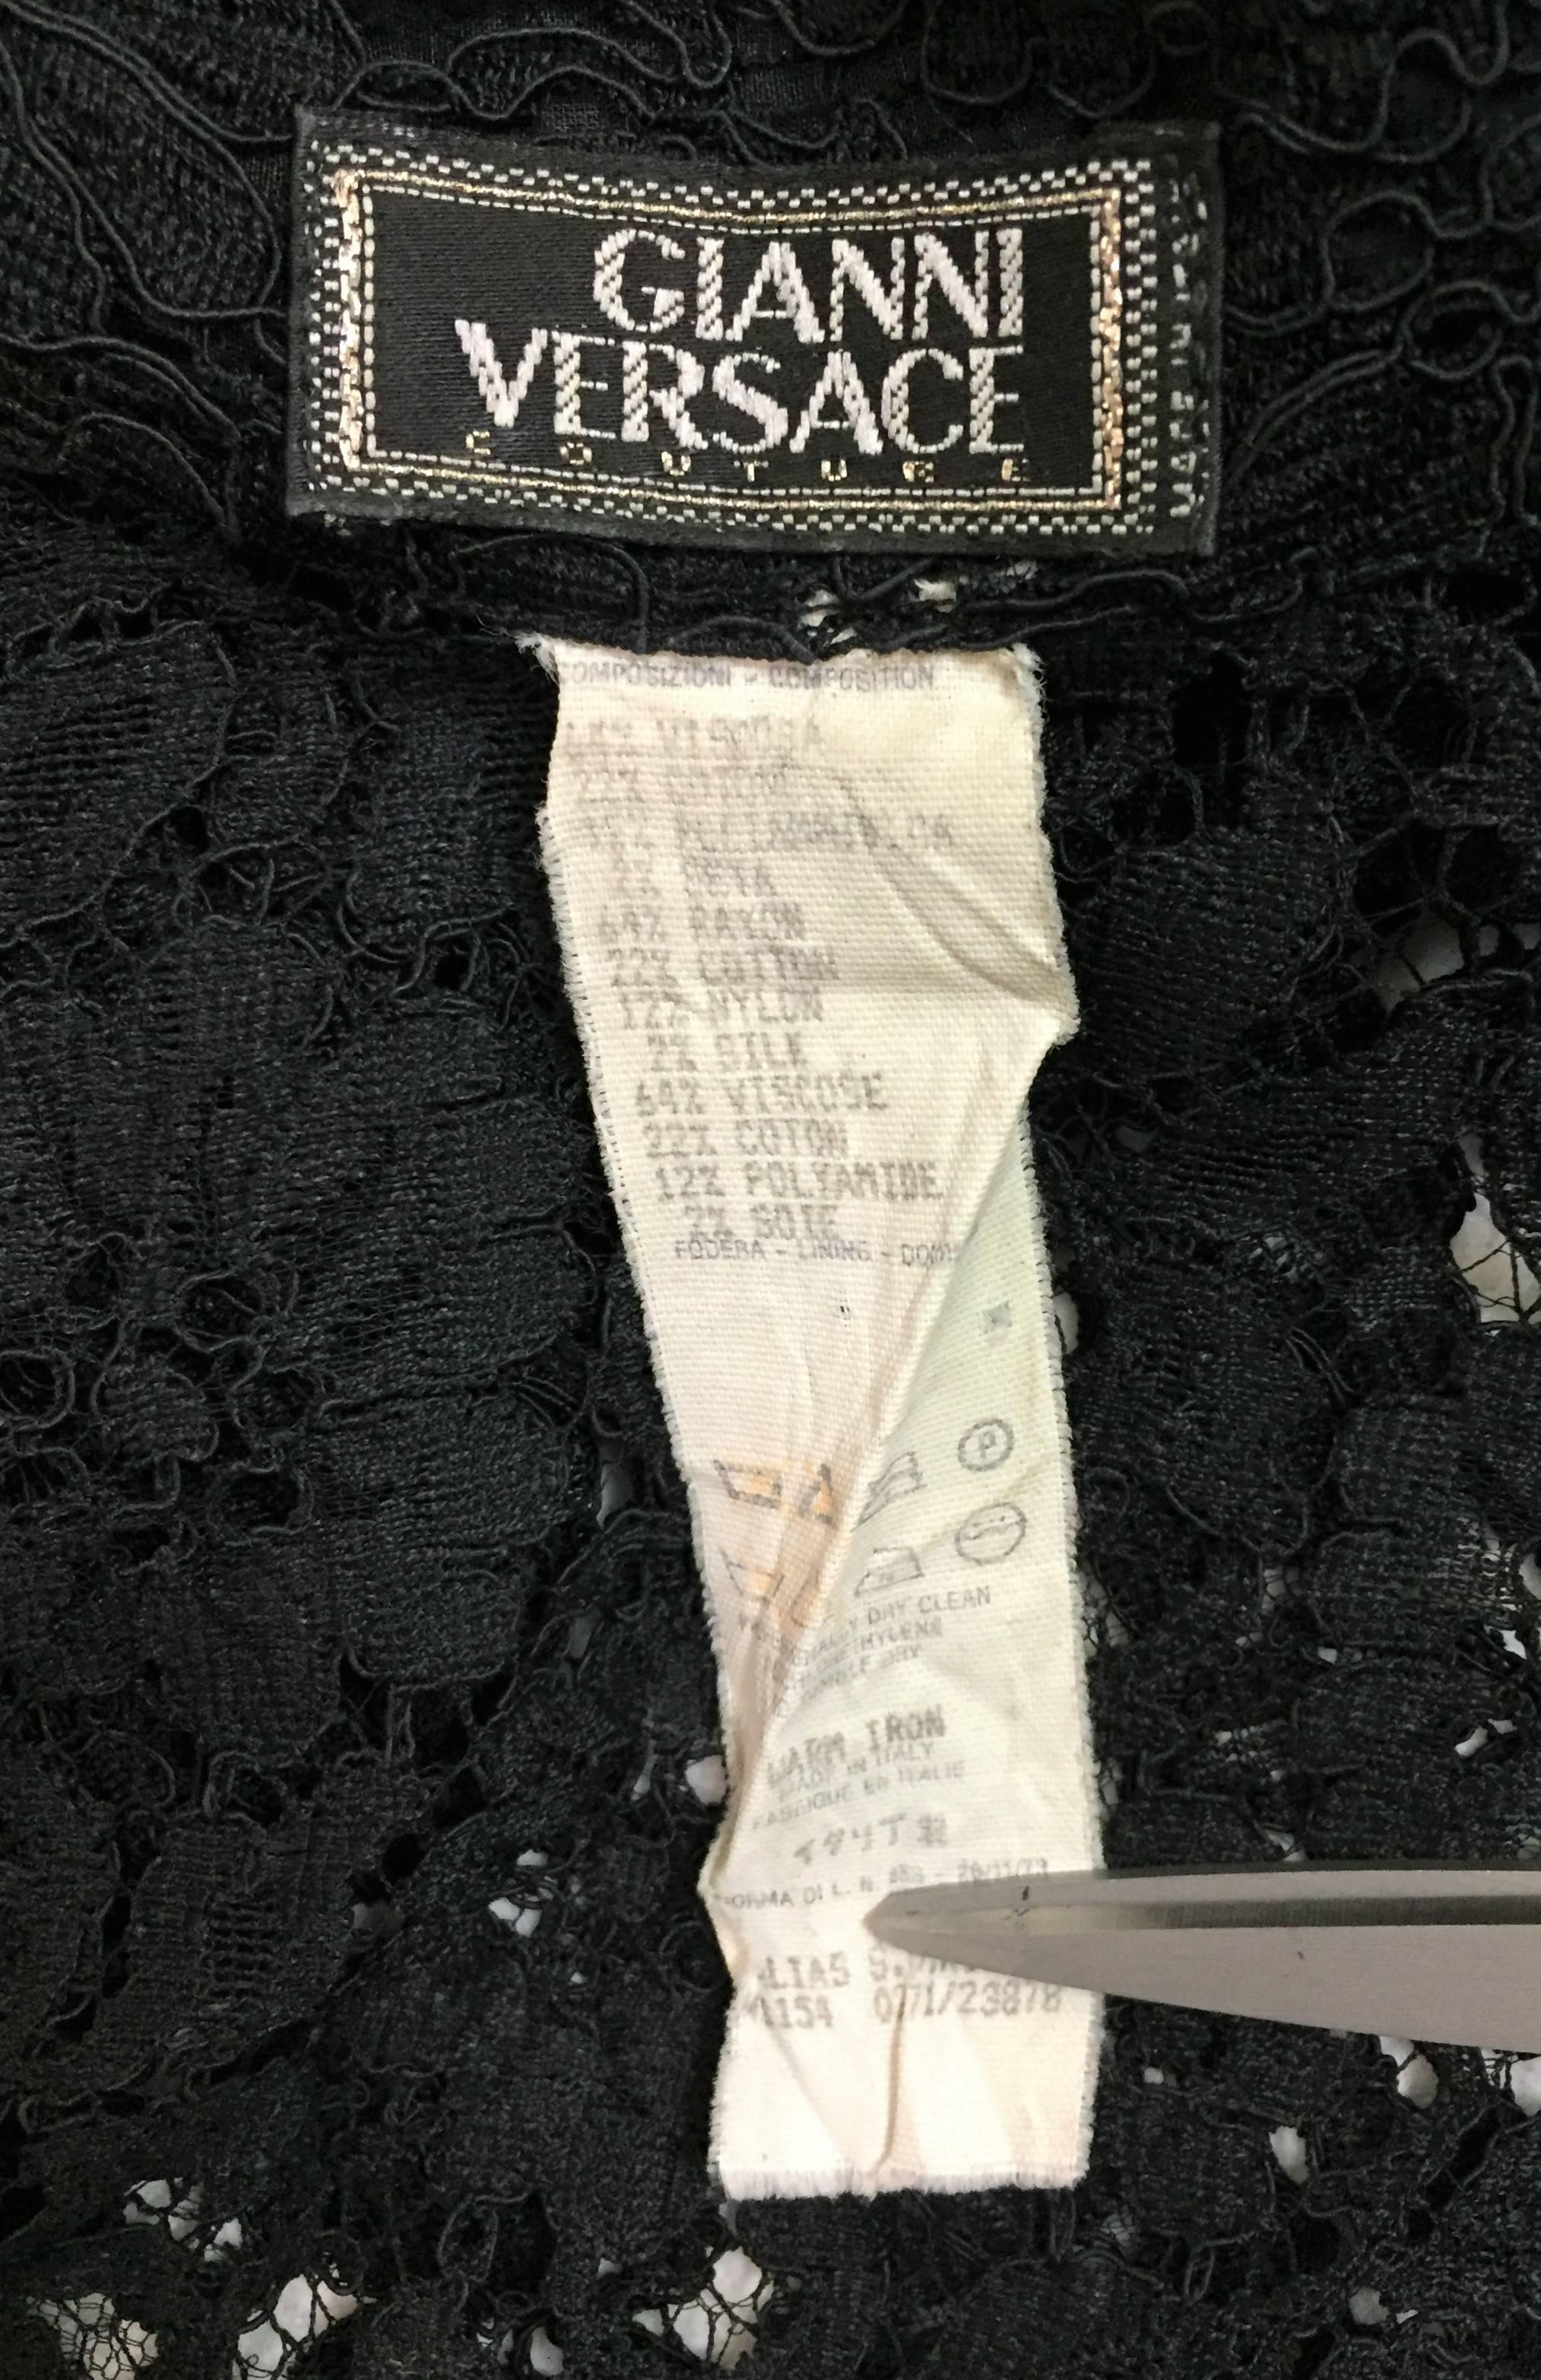 S/S 1994 Gianni Versace Couture Black Sheer Guipure Lace L/S Shirt Dress 38 In Good Condition In Yukon, OK